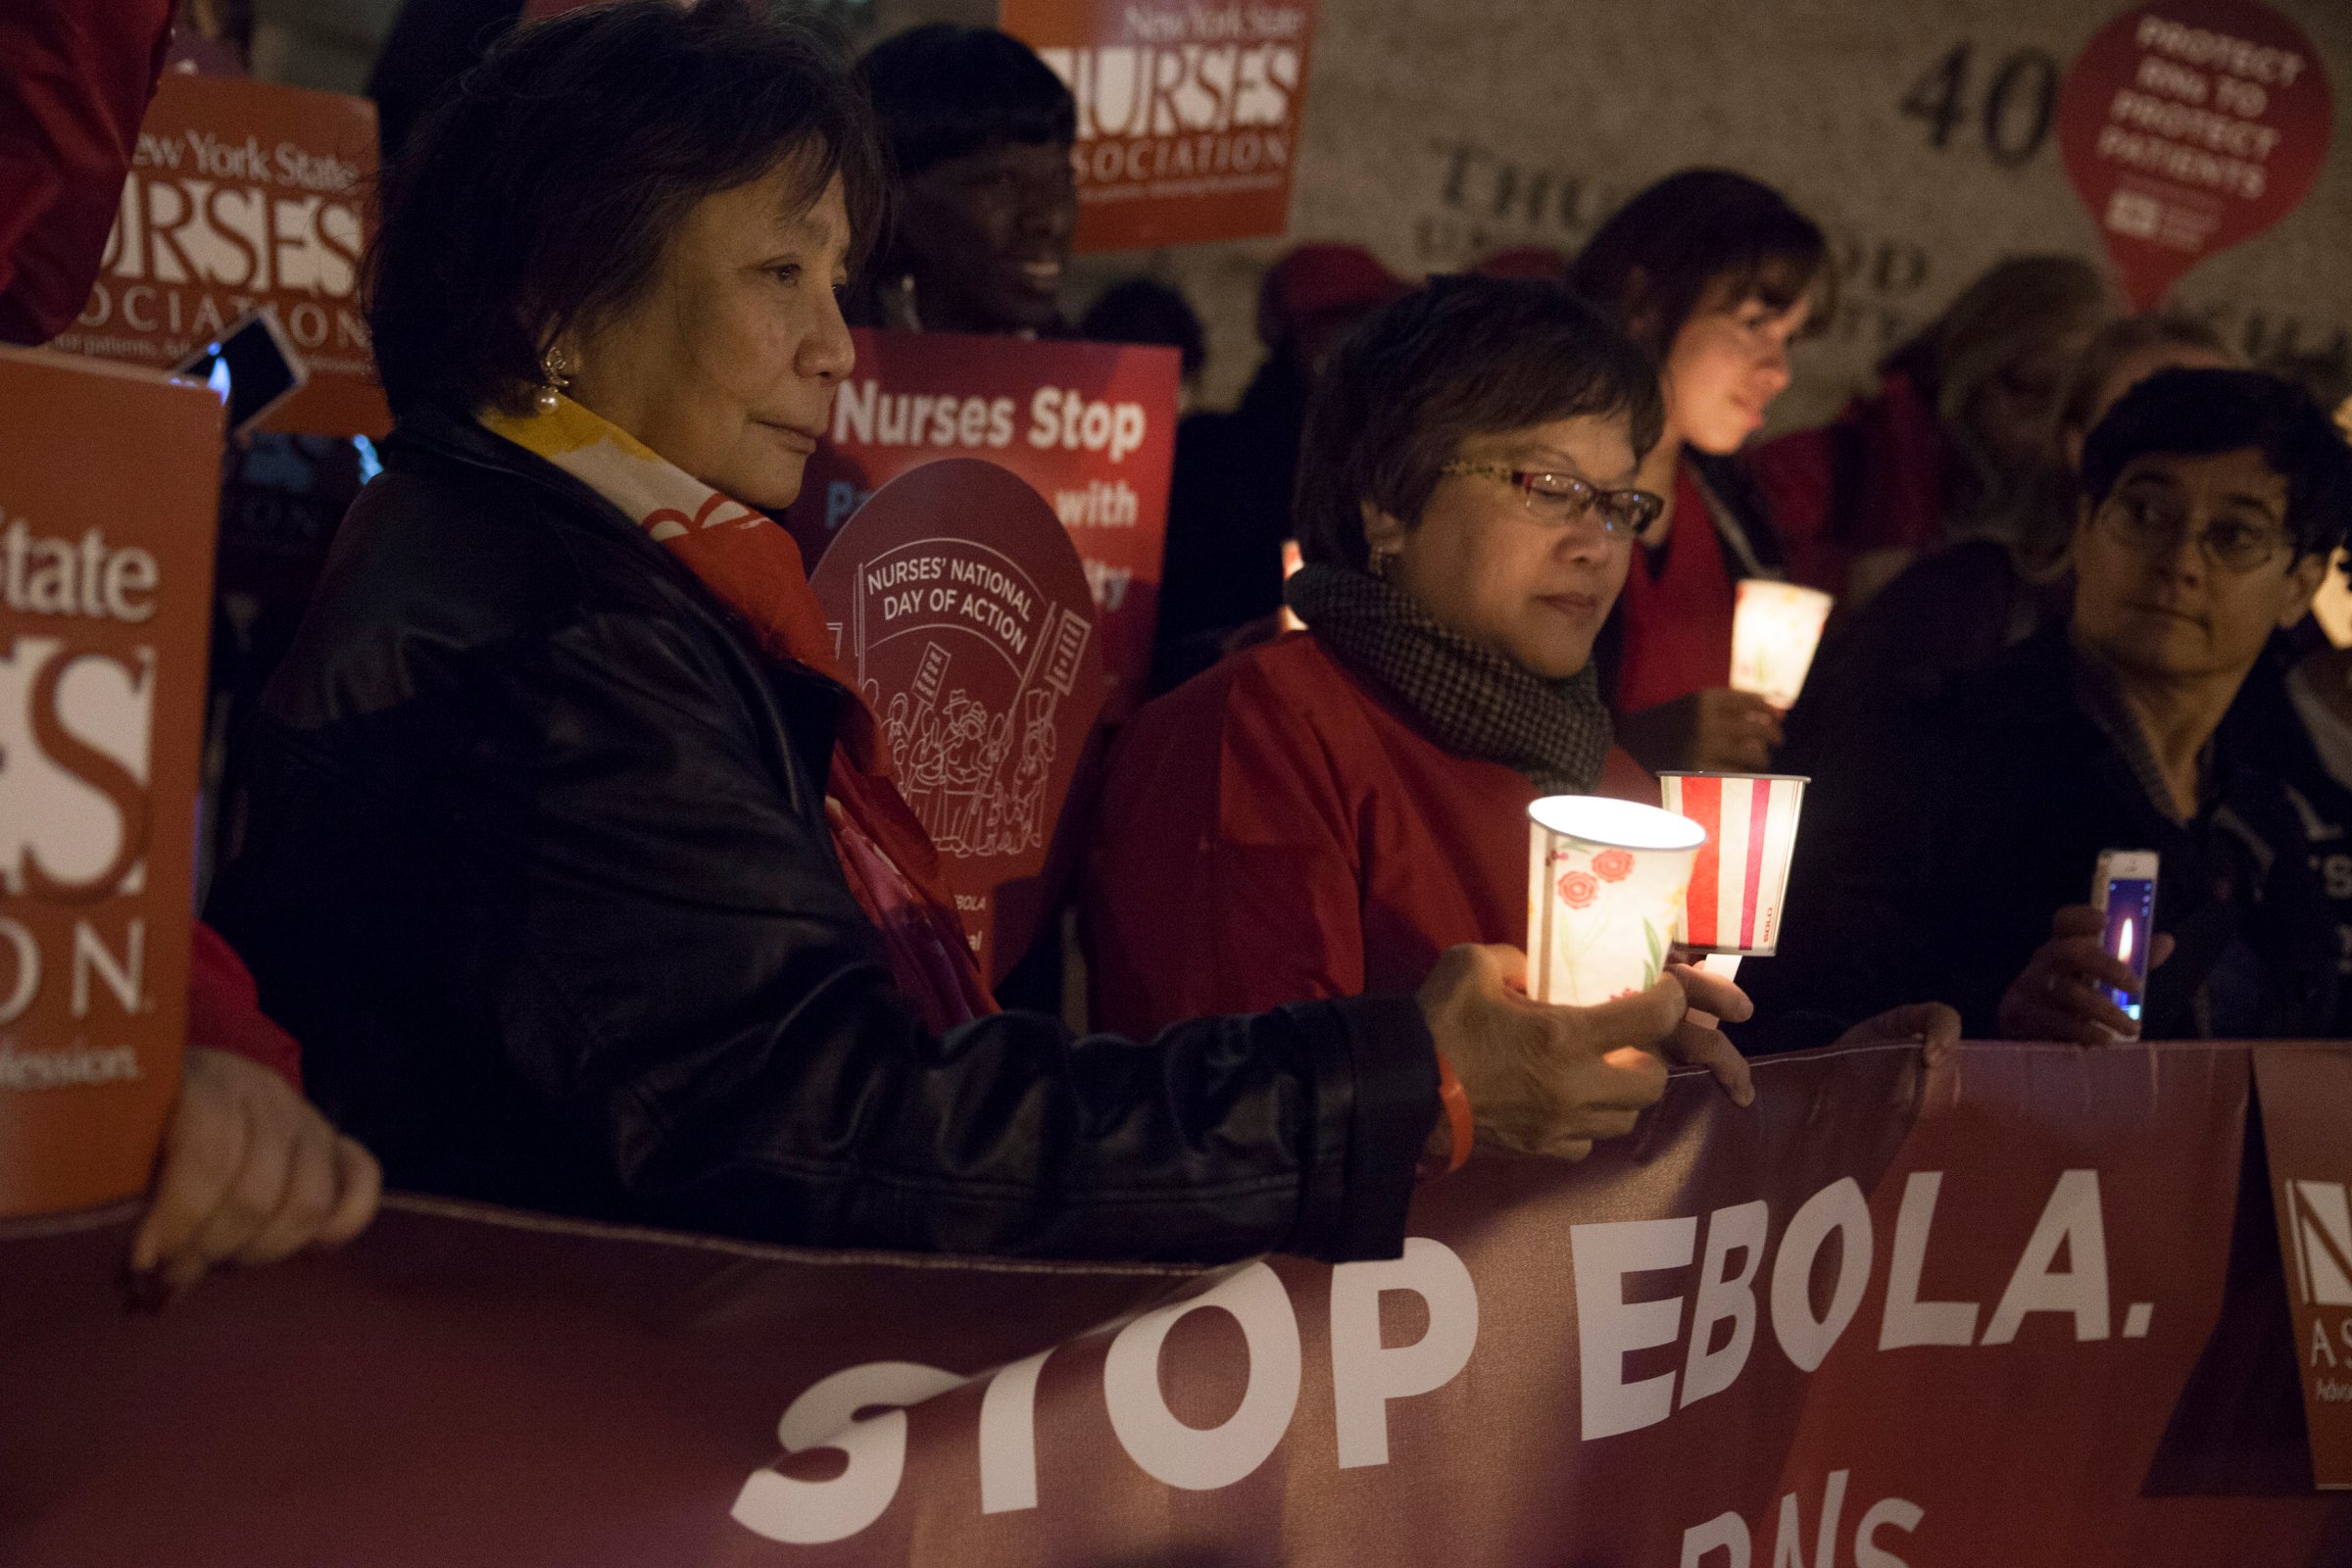 Nurses from the New York State Nurses Association protest for improved Ebola safeguards, part of a national day of action, in New York